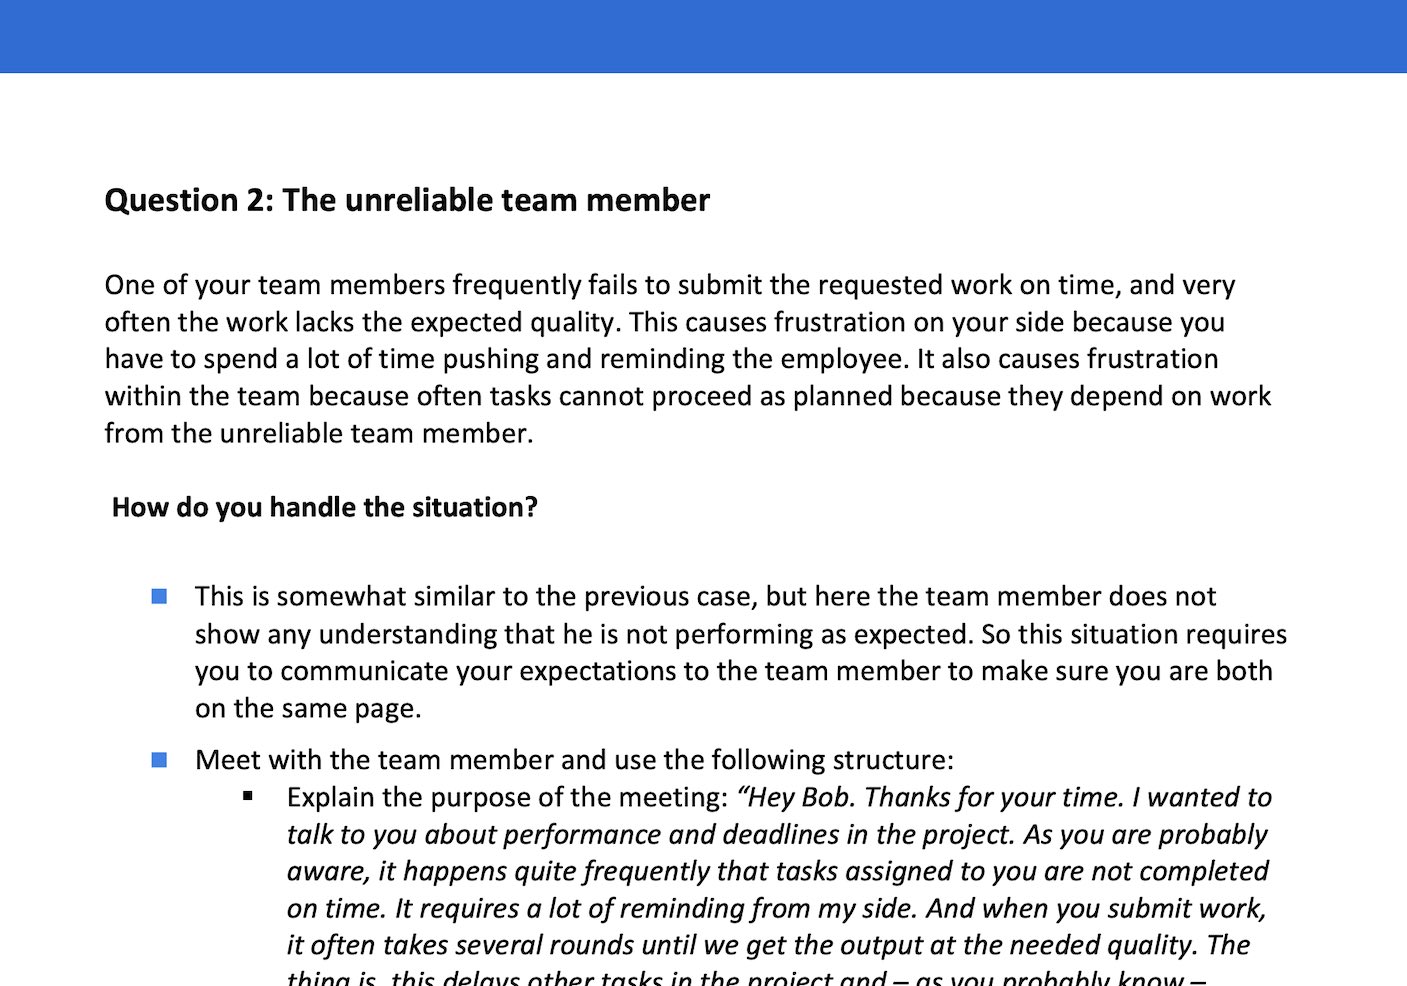 Sample question taken from the Project Management Interview Guide. The guide provides a detailed breakdown of points to include in your answer.